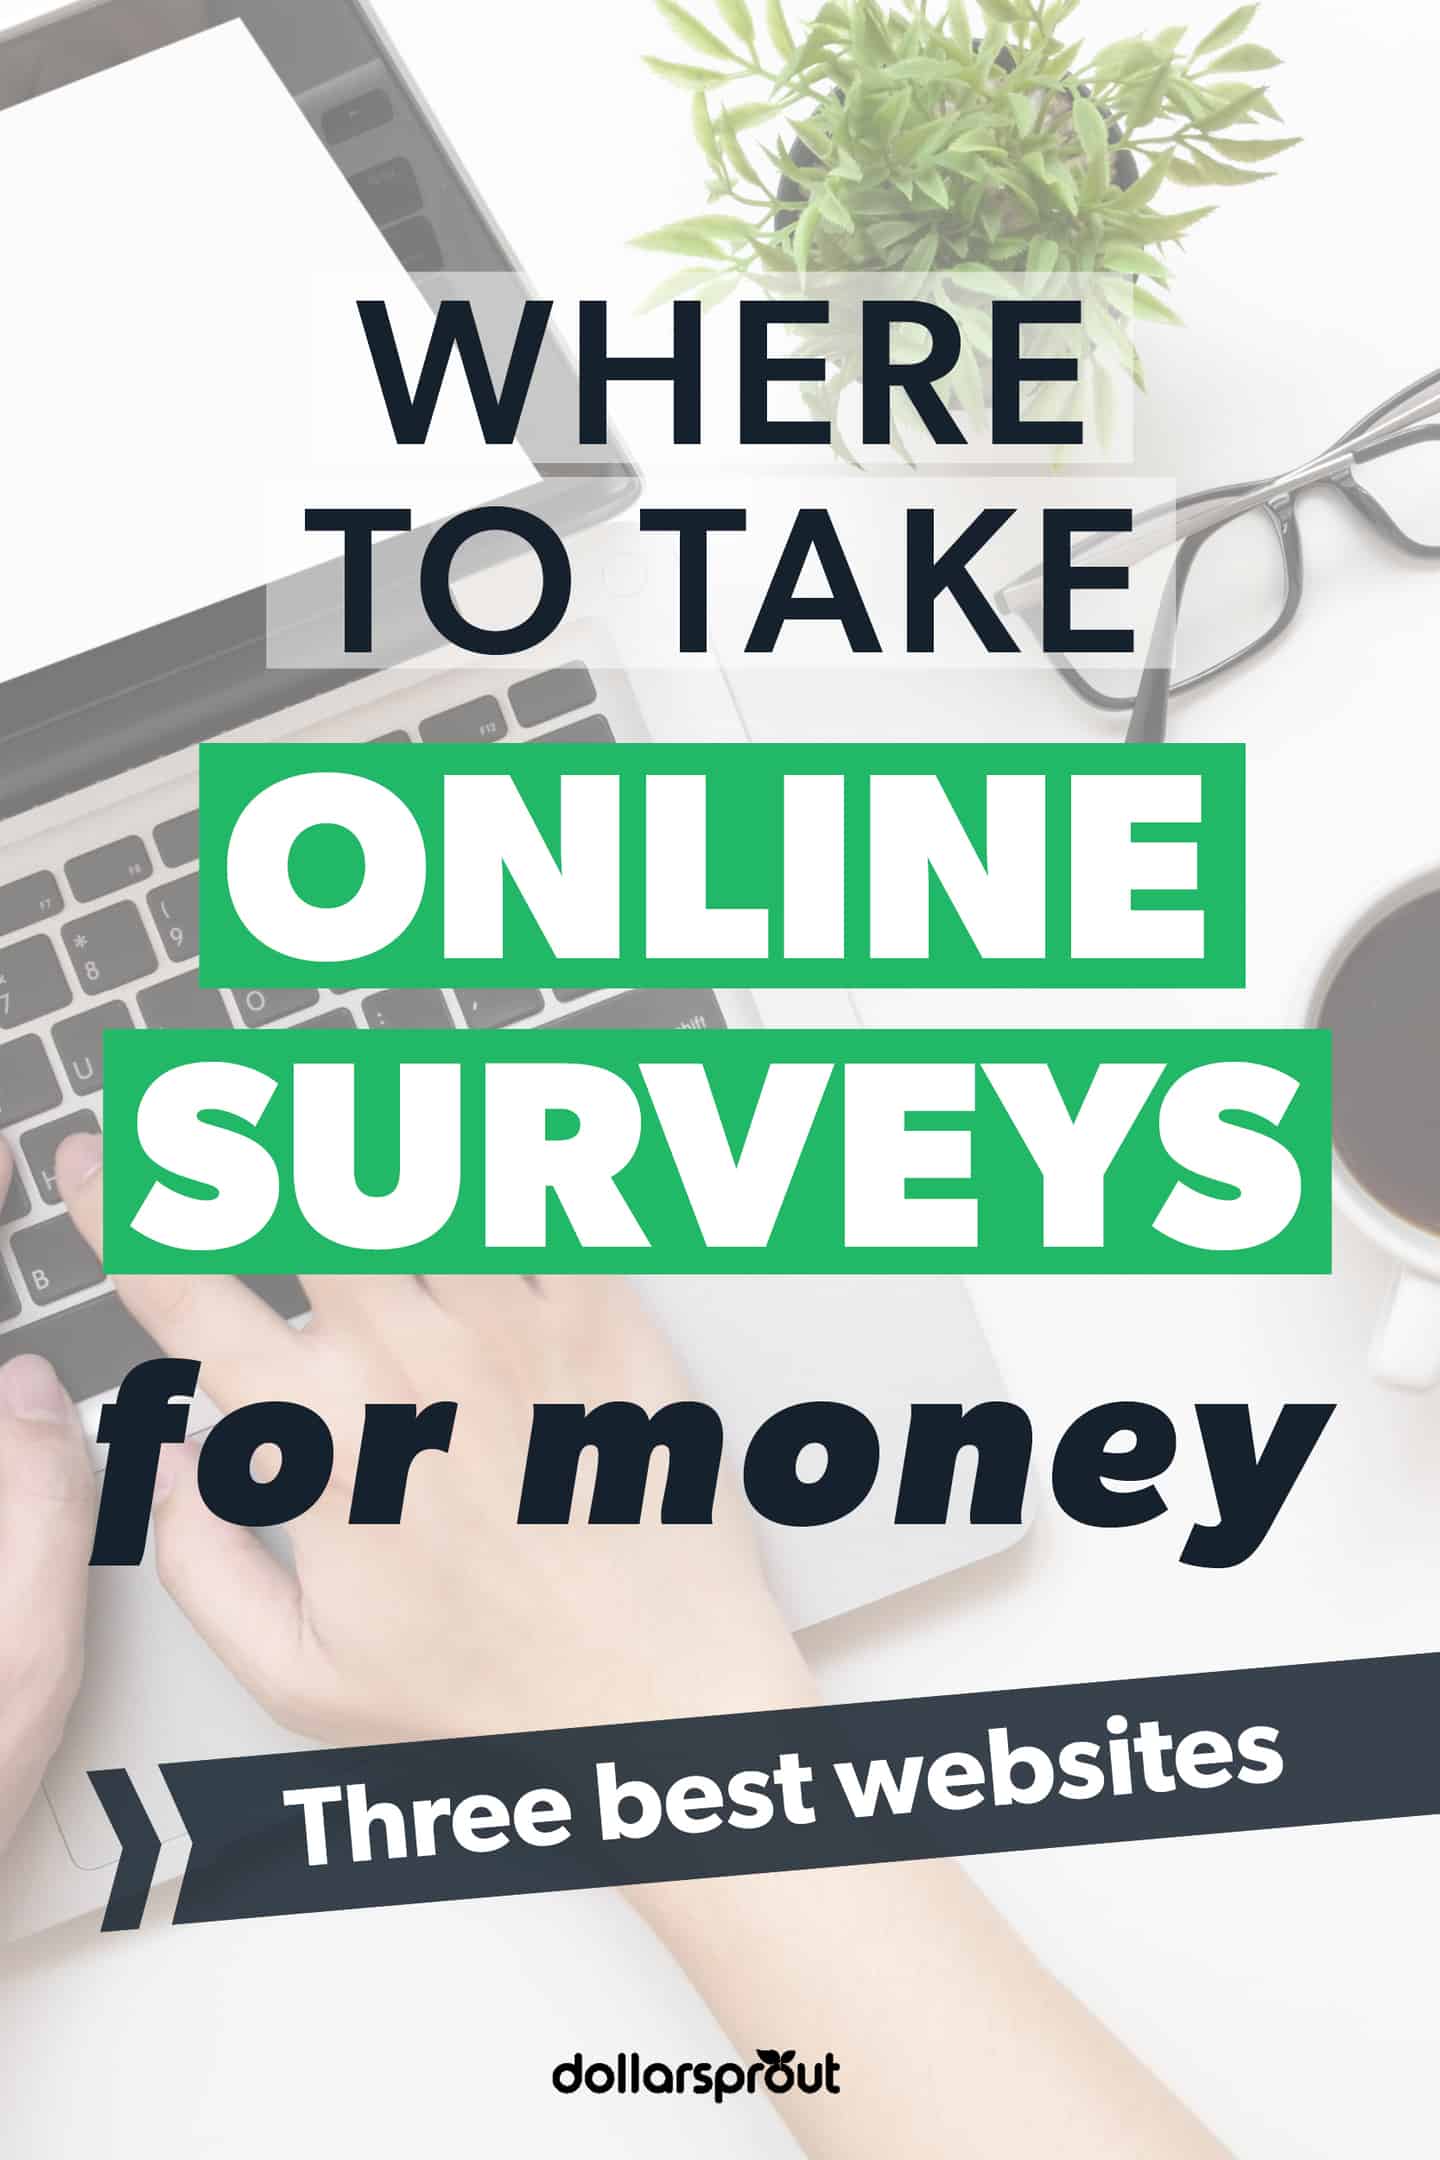 7 Tips To Make The Most When Taking Online Surveys For Money - 